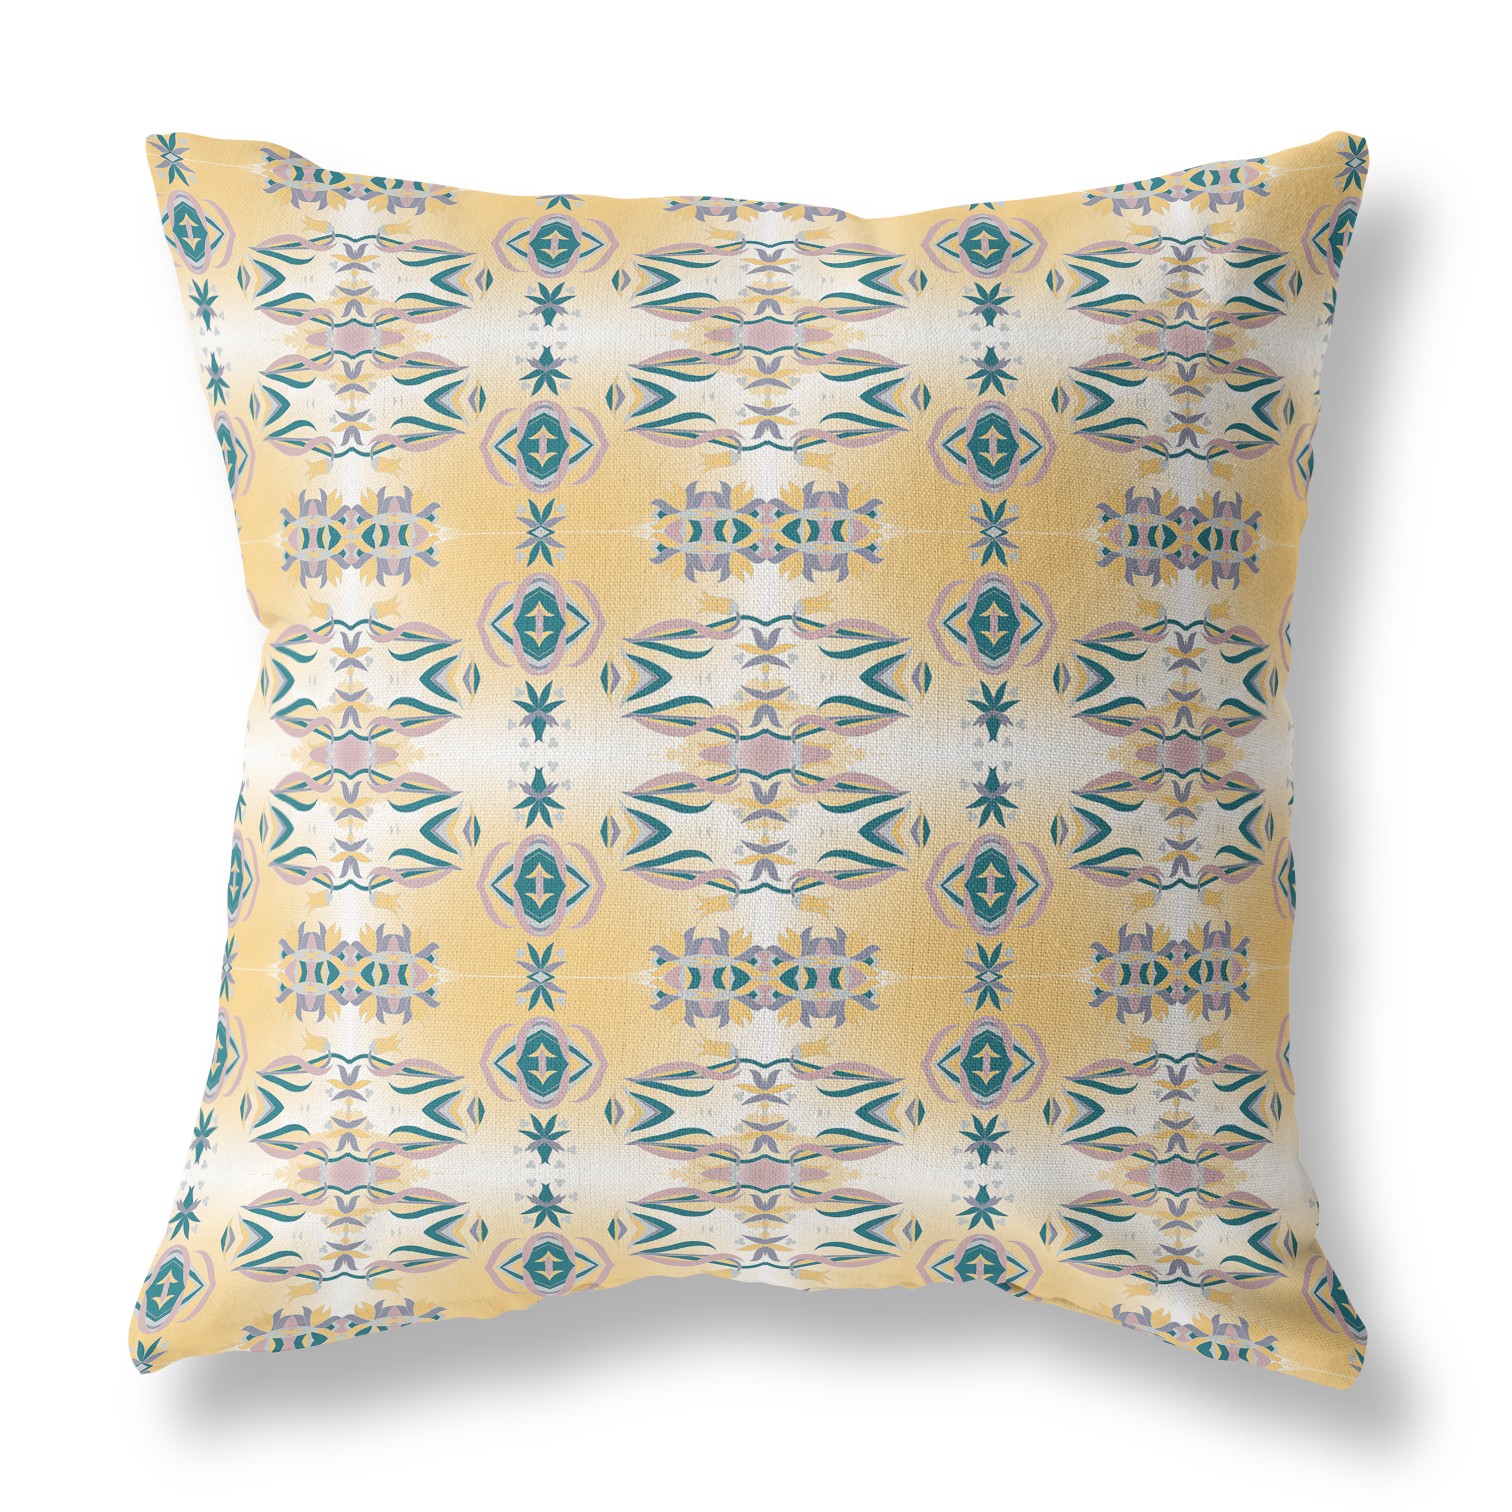 20” Tan Blue Patterned Indoor Outdoor Zippered Throw Pillow-411067-1